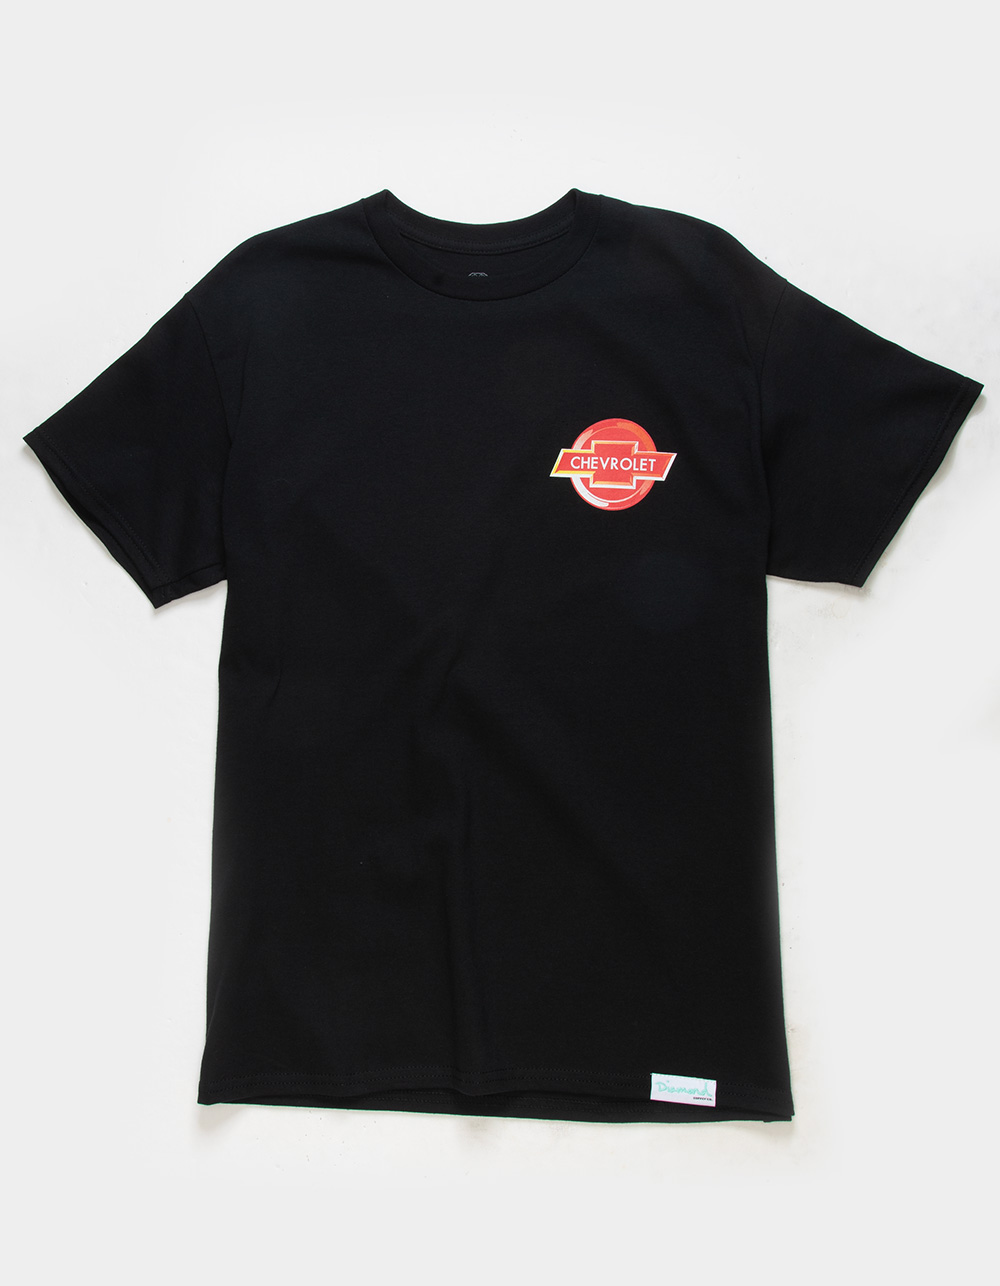 DIAMOND SUPPLY CO. x Chevy Powered By Mens Tee - BLACK | Tillys